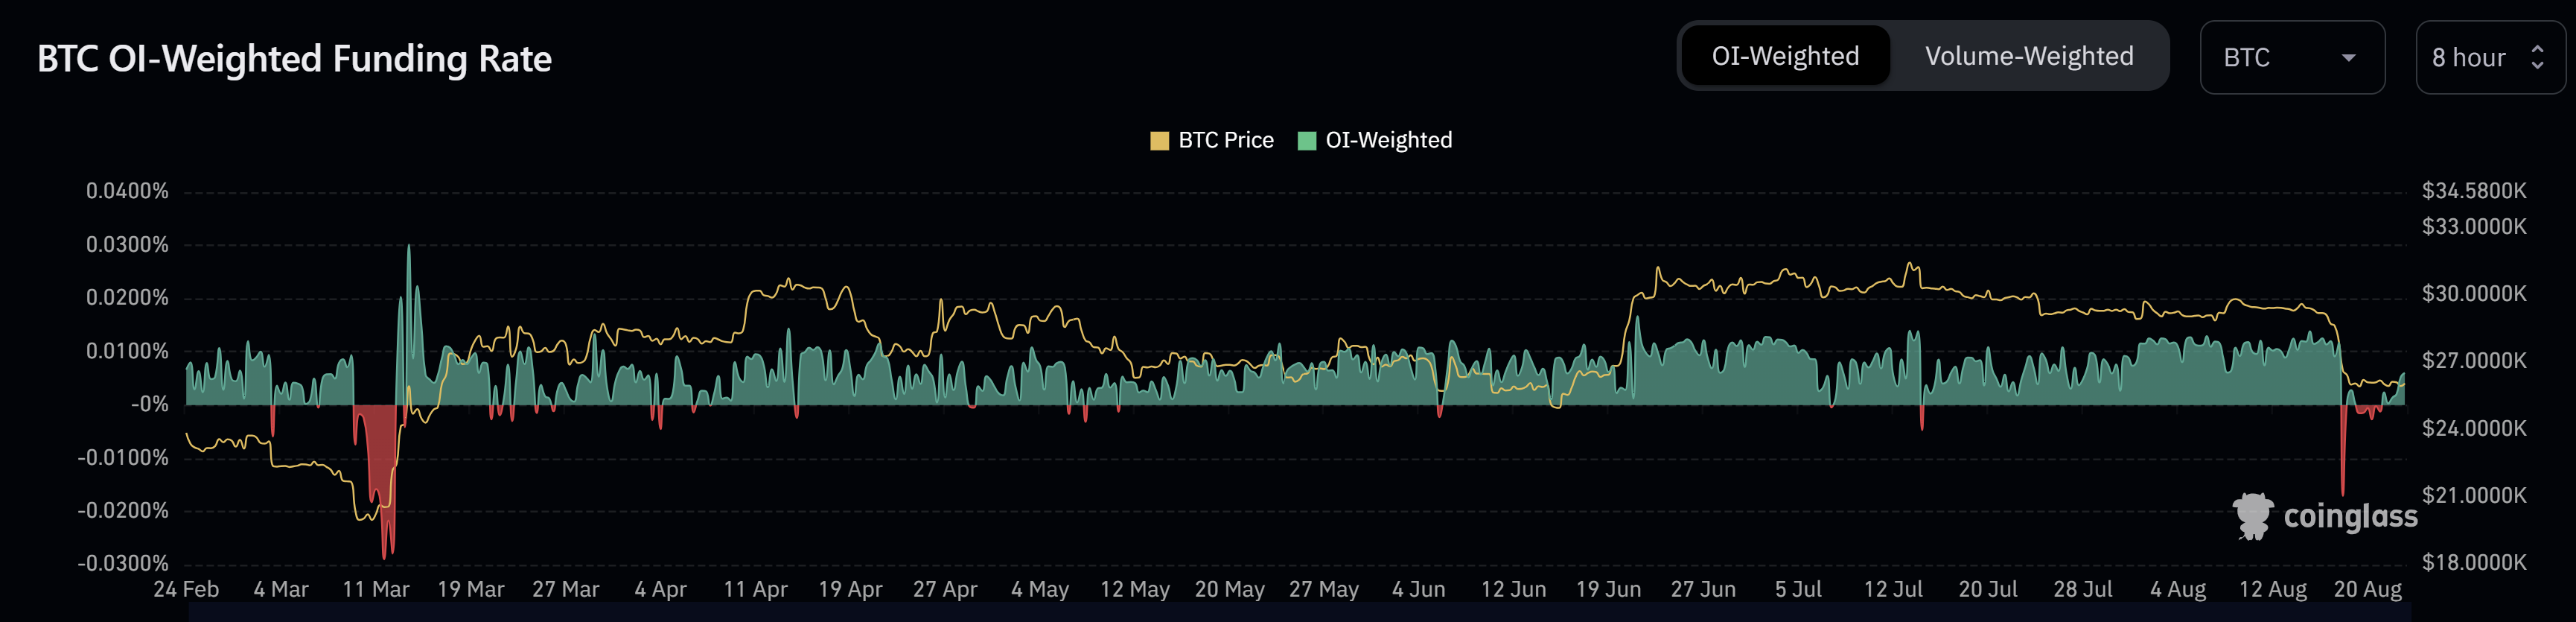 BTC OI-Weighted Funding Rate